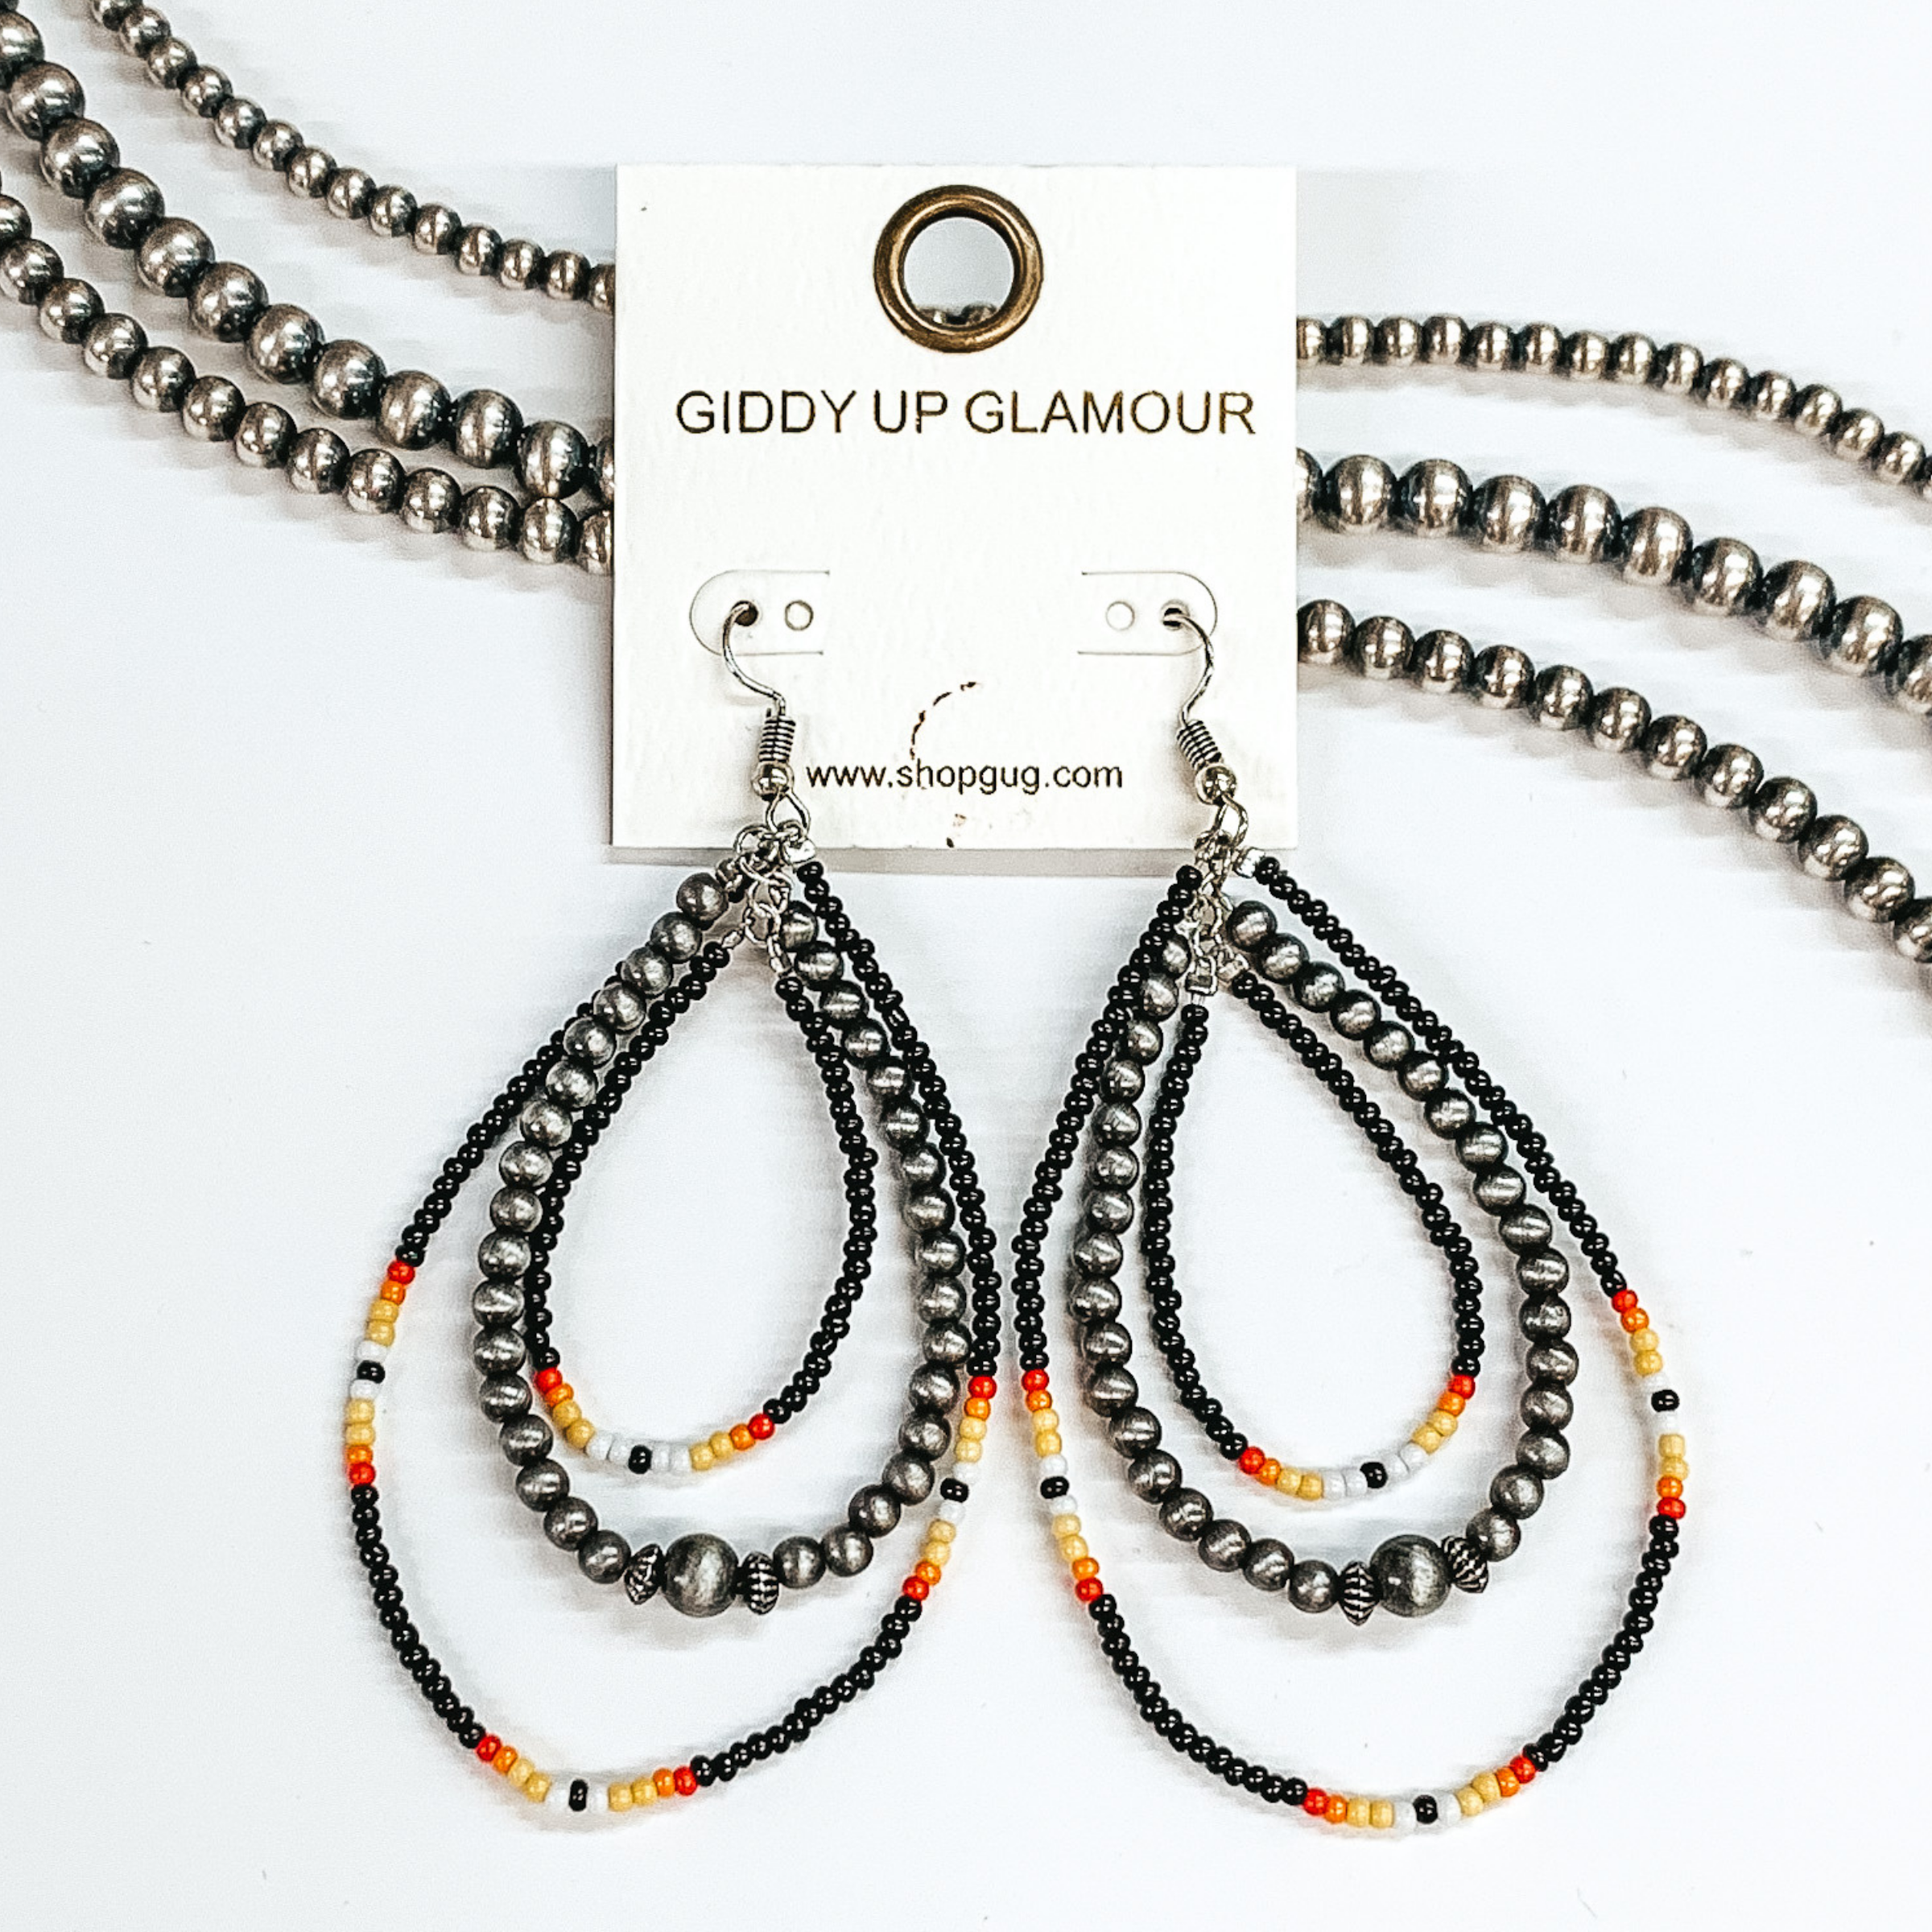 Three layer, hanging beaded teardrop earrings. The majority of the beads are black with three  segments including maroon, red, yellow, white,  and black beads. Second layer has faux Navajo  beads with one large bead in the center.  These earrings are pictured on a white background  with beads as decor.